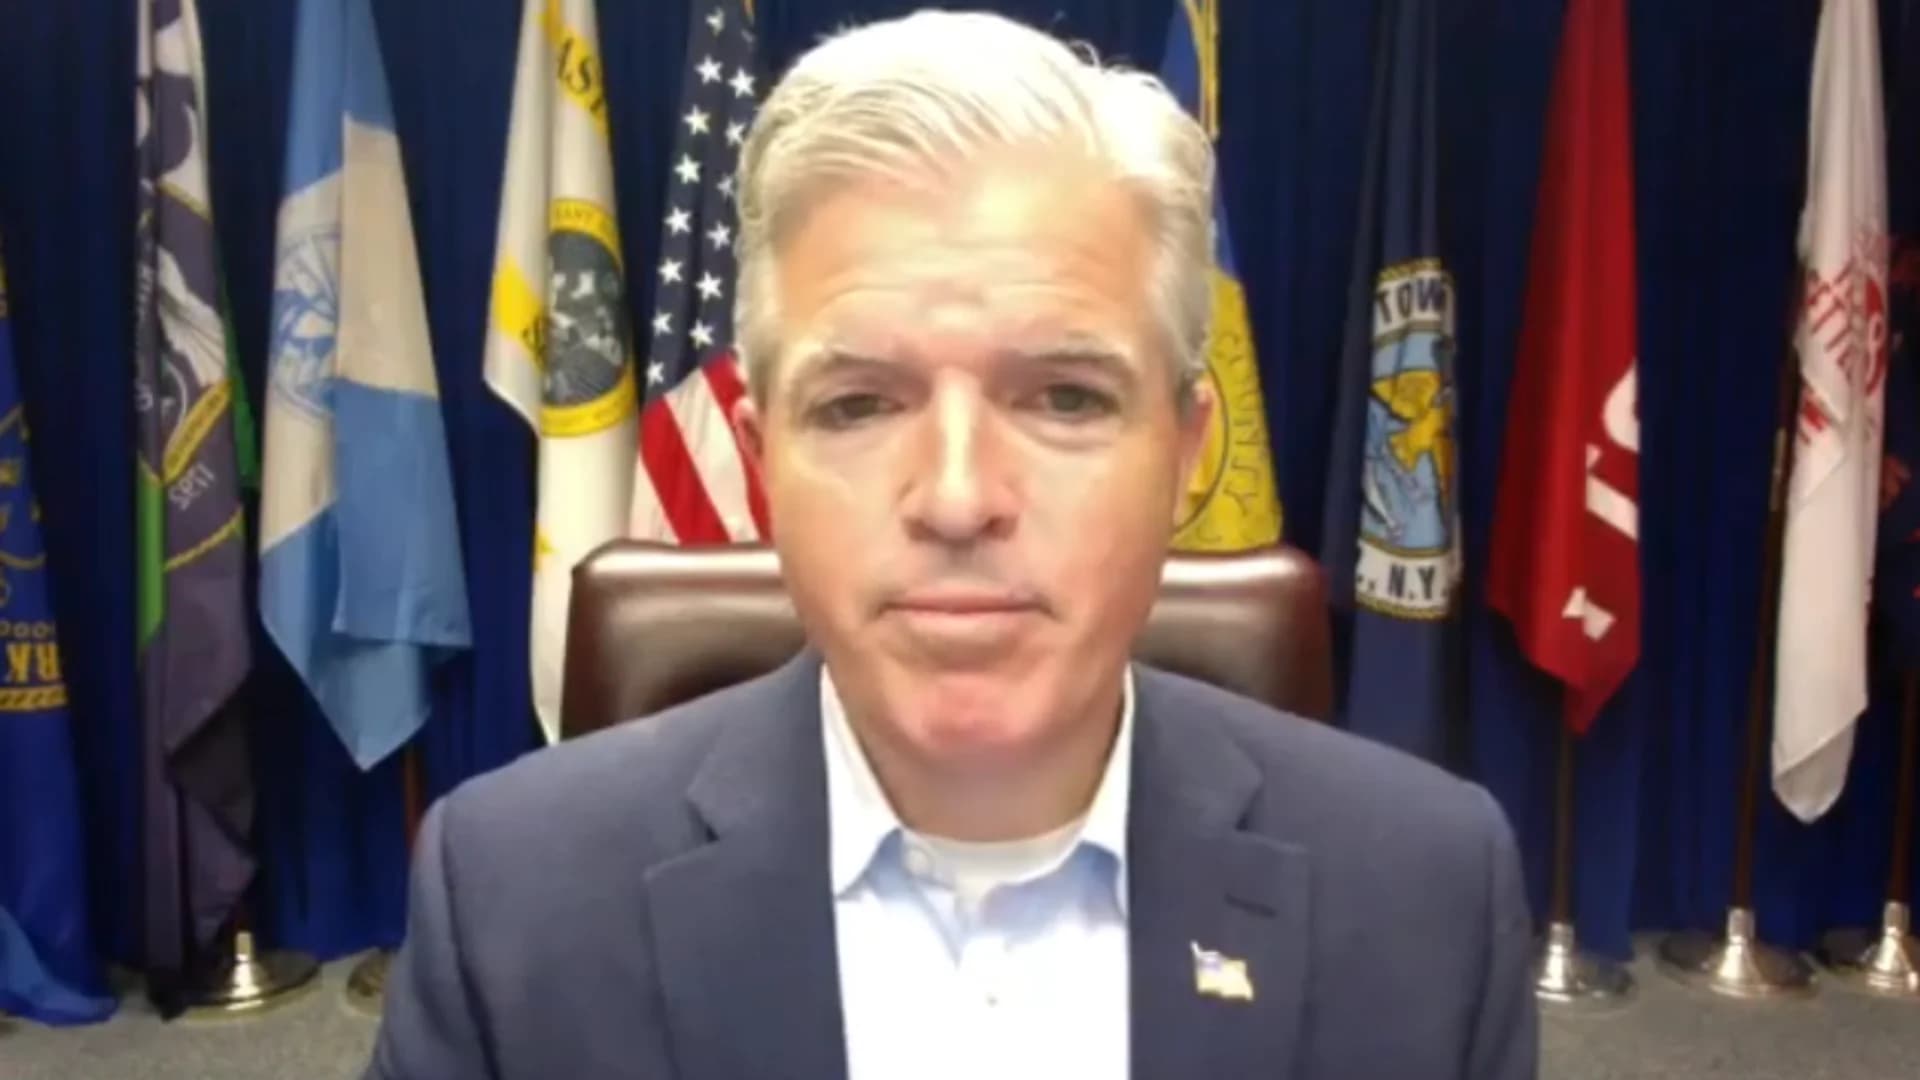 County Executive Steve Bellone holds briefing on Suffolk's COVID-19 response - WATCH LIVE